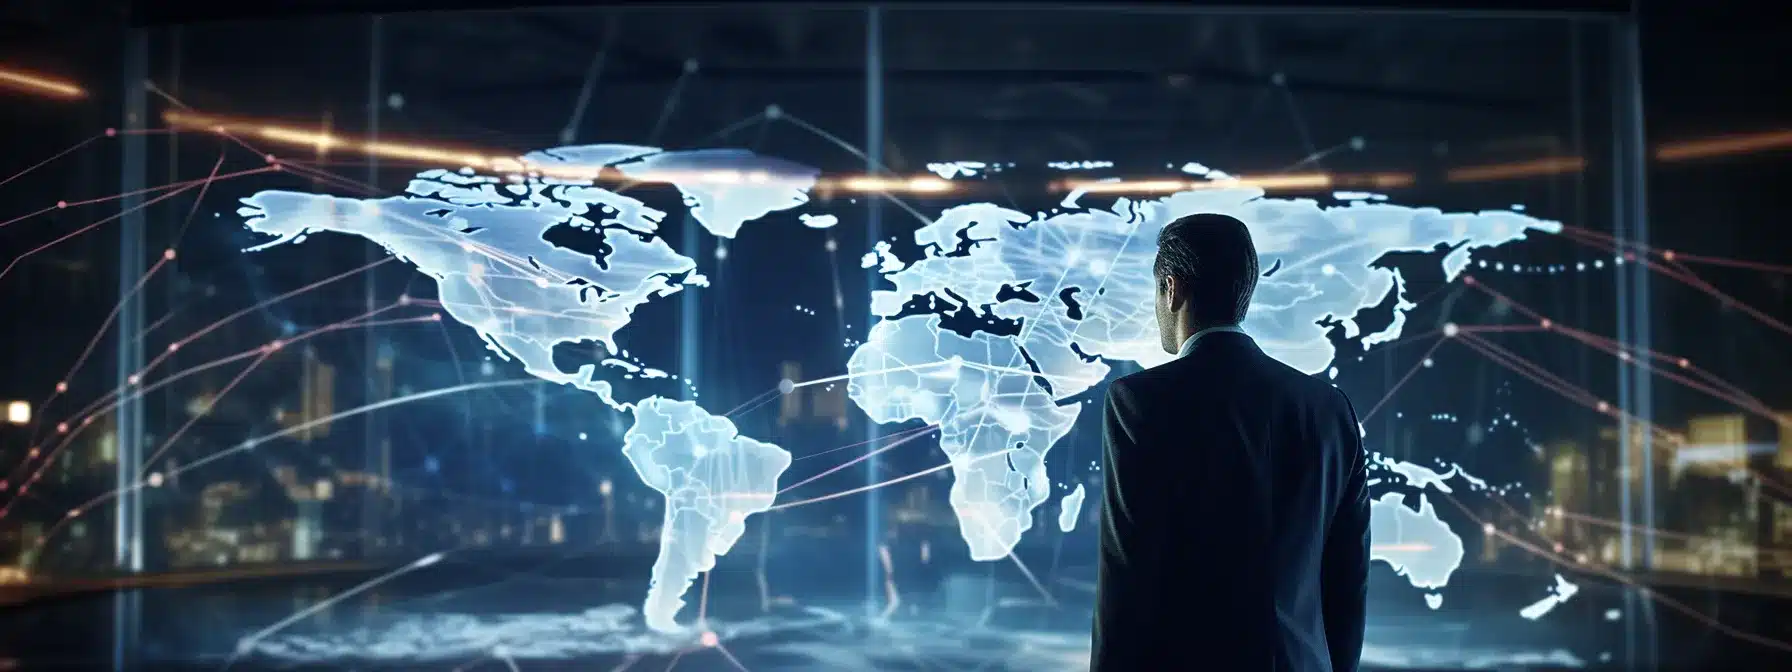 A Ceo Observing A Dynamic World Map With Technology Reshaping Their Brand'S Global Journeys.